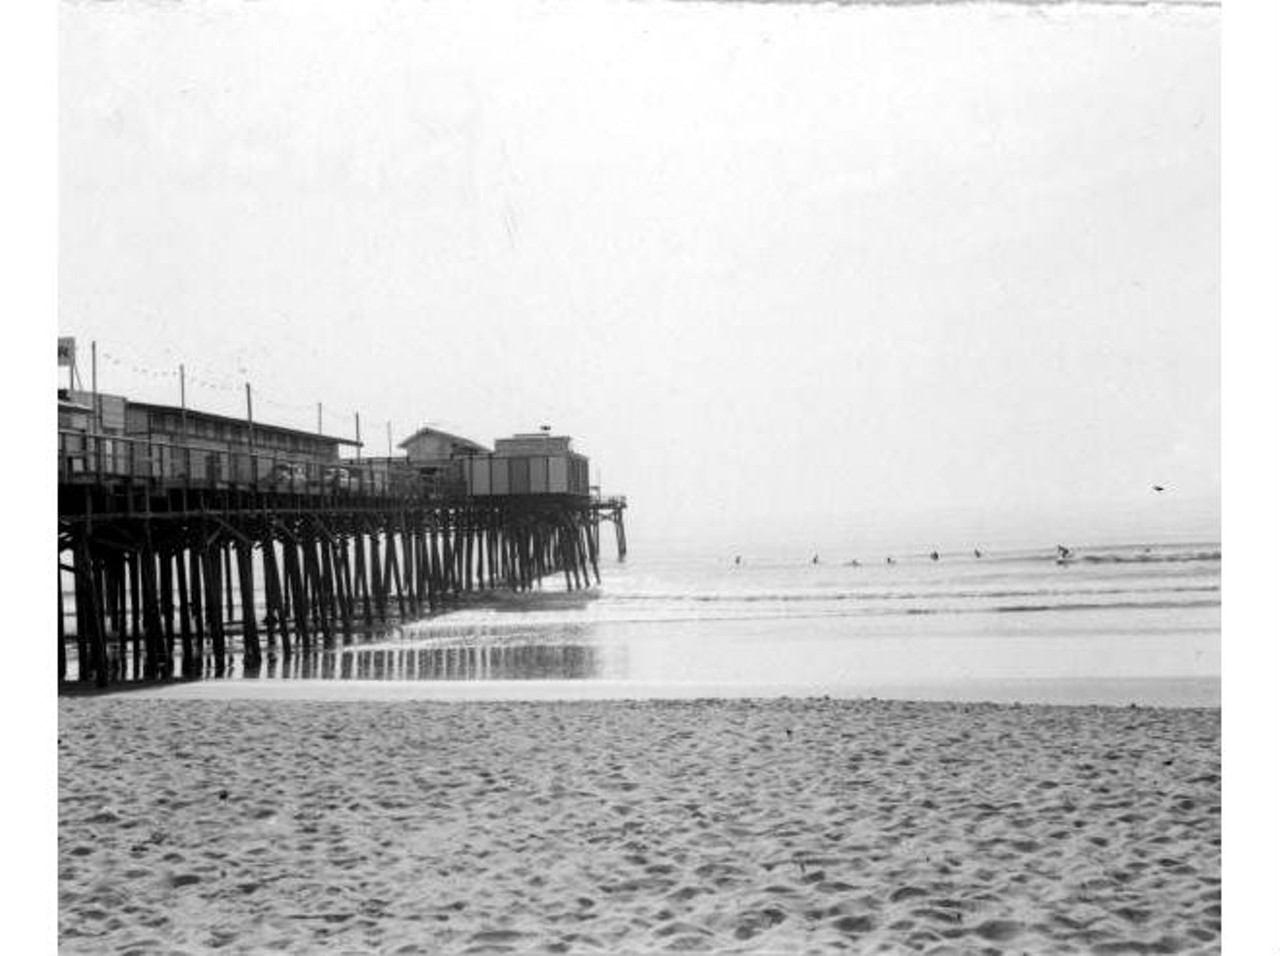 View of the pier and the beach, 1970